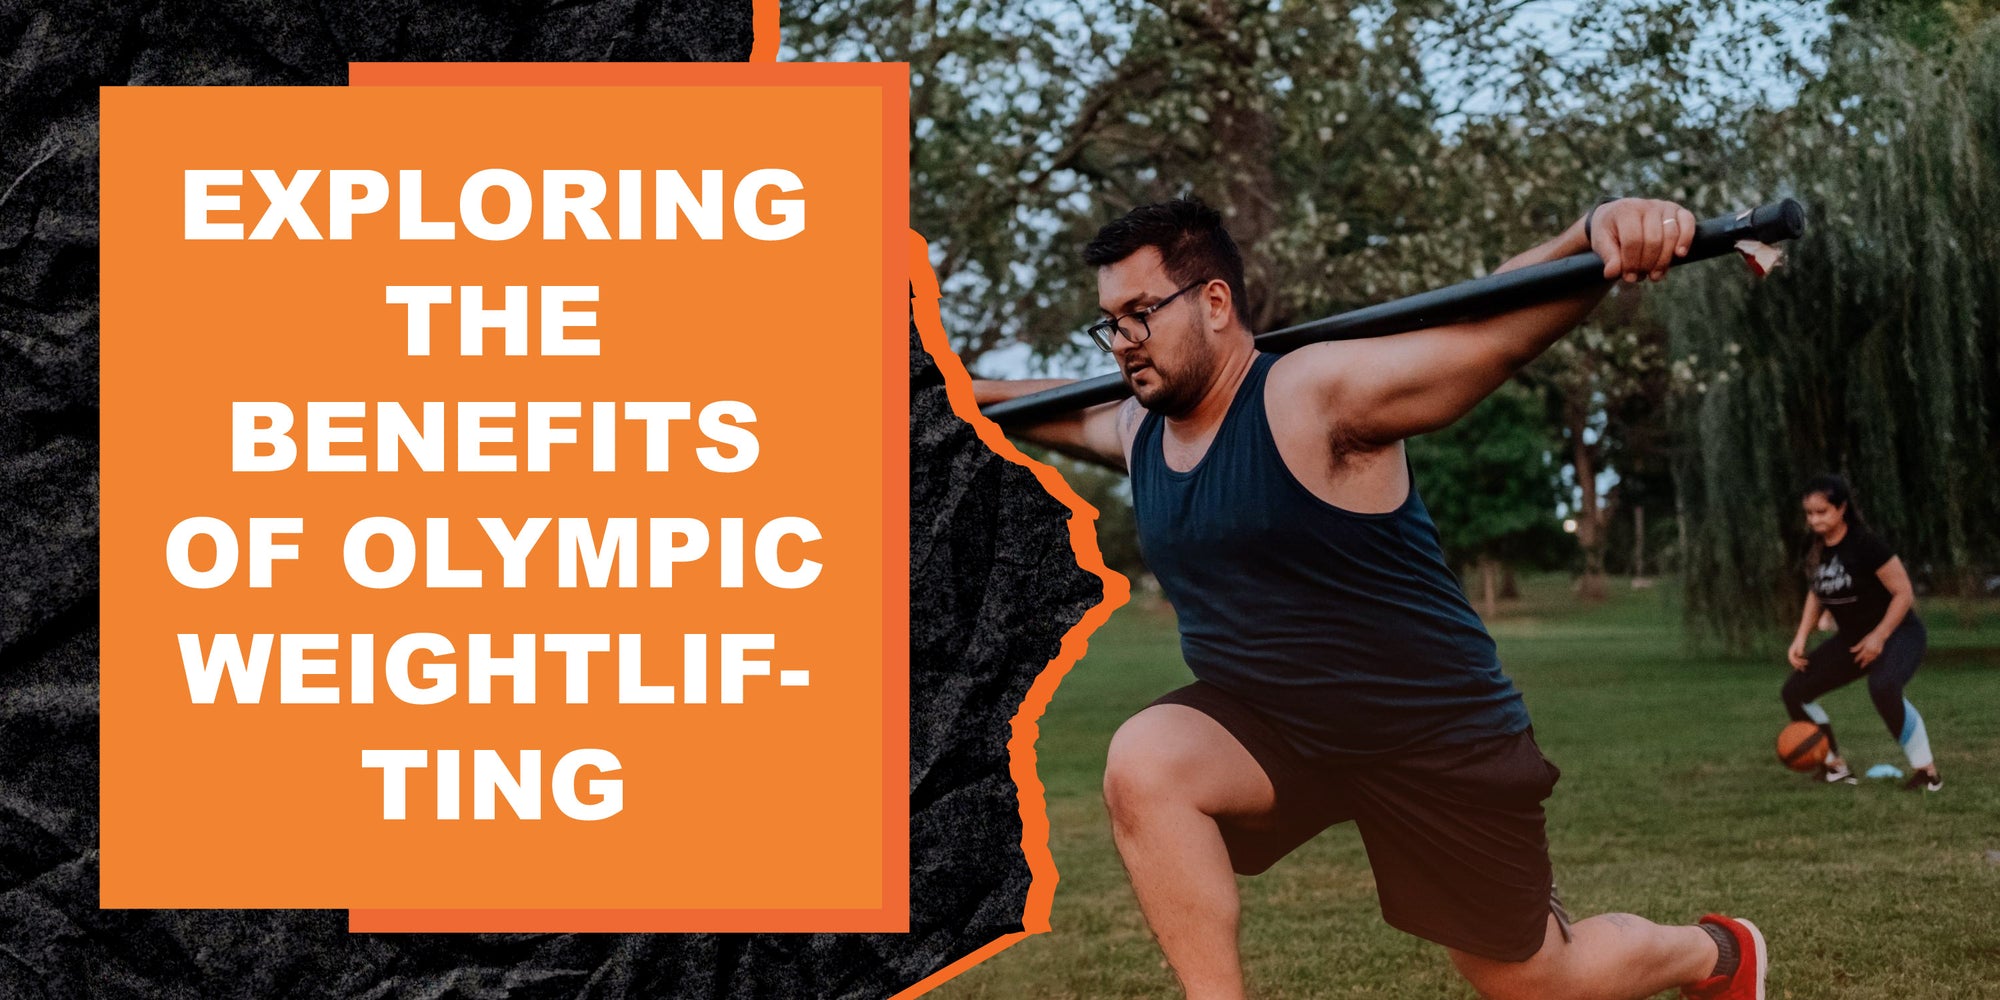 Exploring the Benefits of Olympic Weightlifting